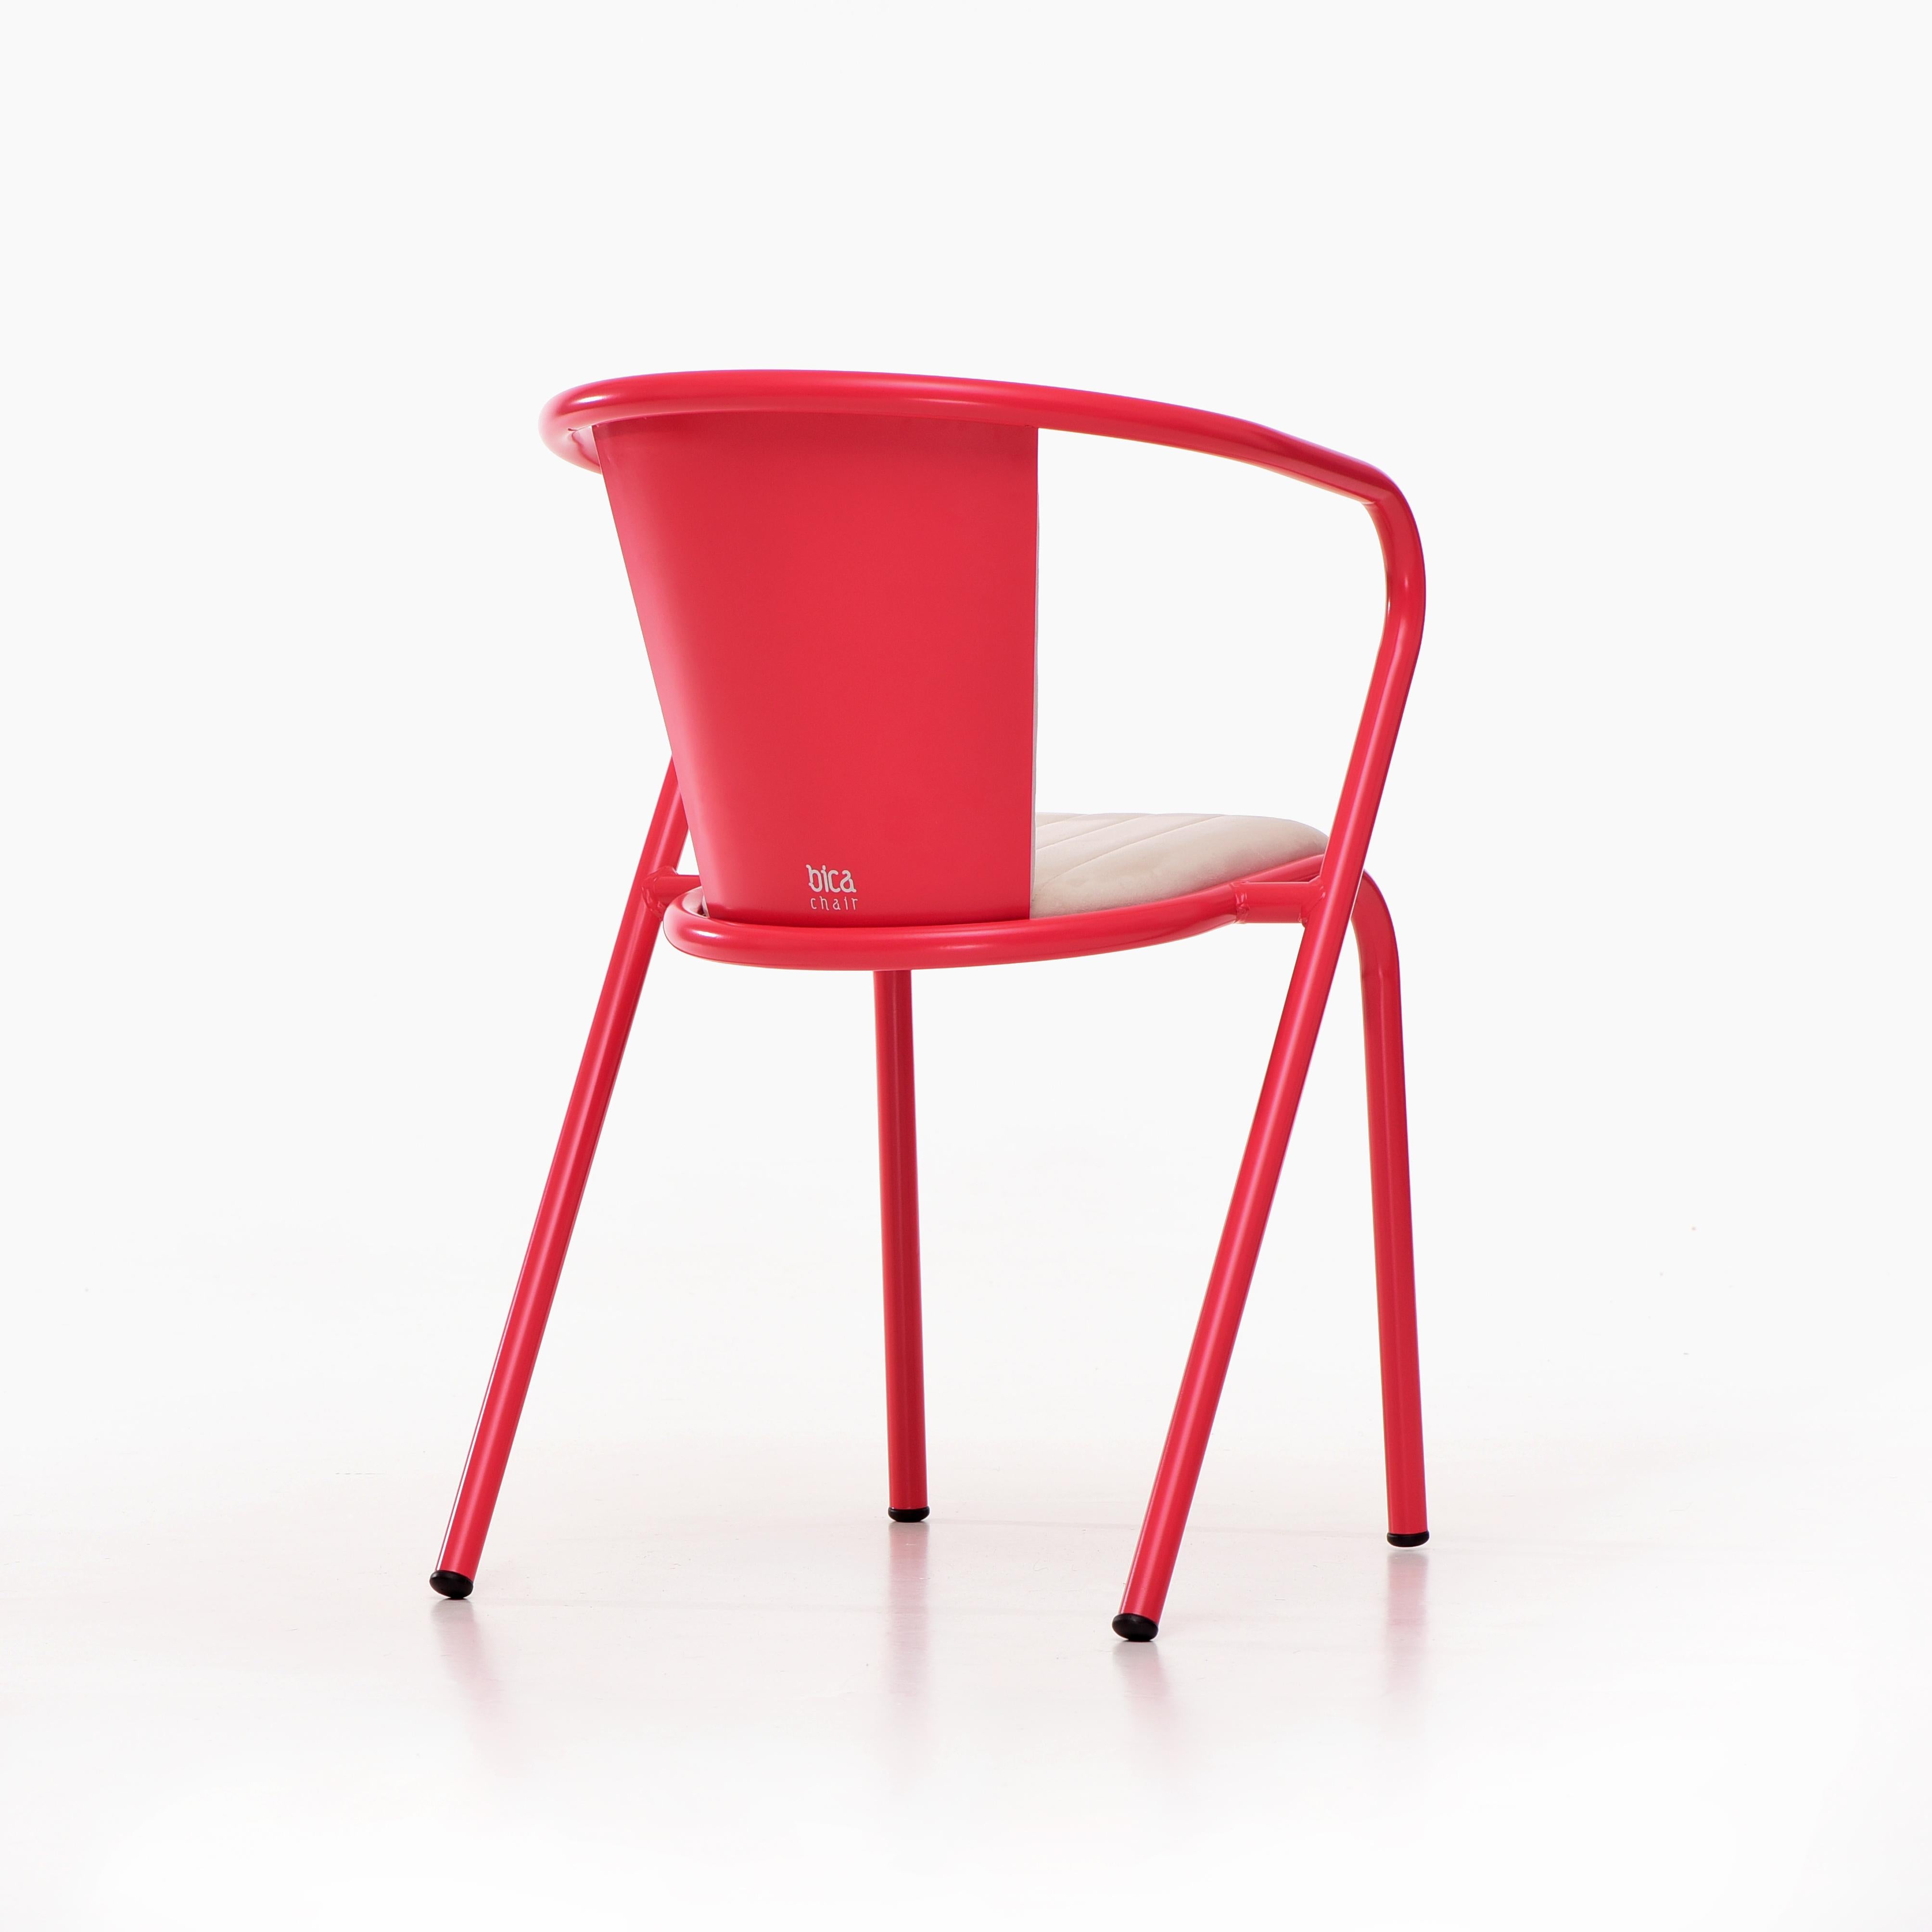 Portuguese BICAchair Modern Steel Armchair Strawberry Red, Upholstery in Soft Velvet For Sale